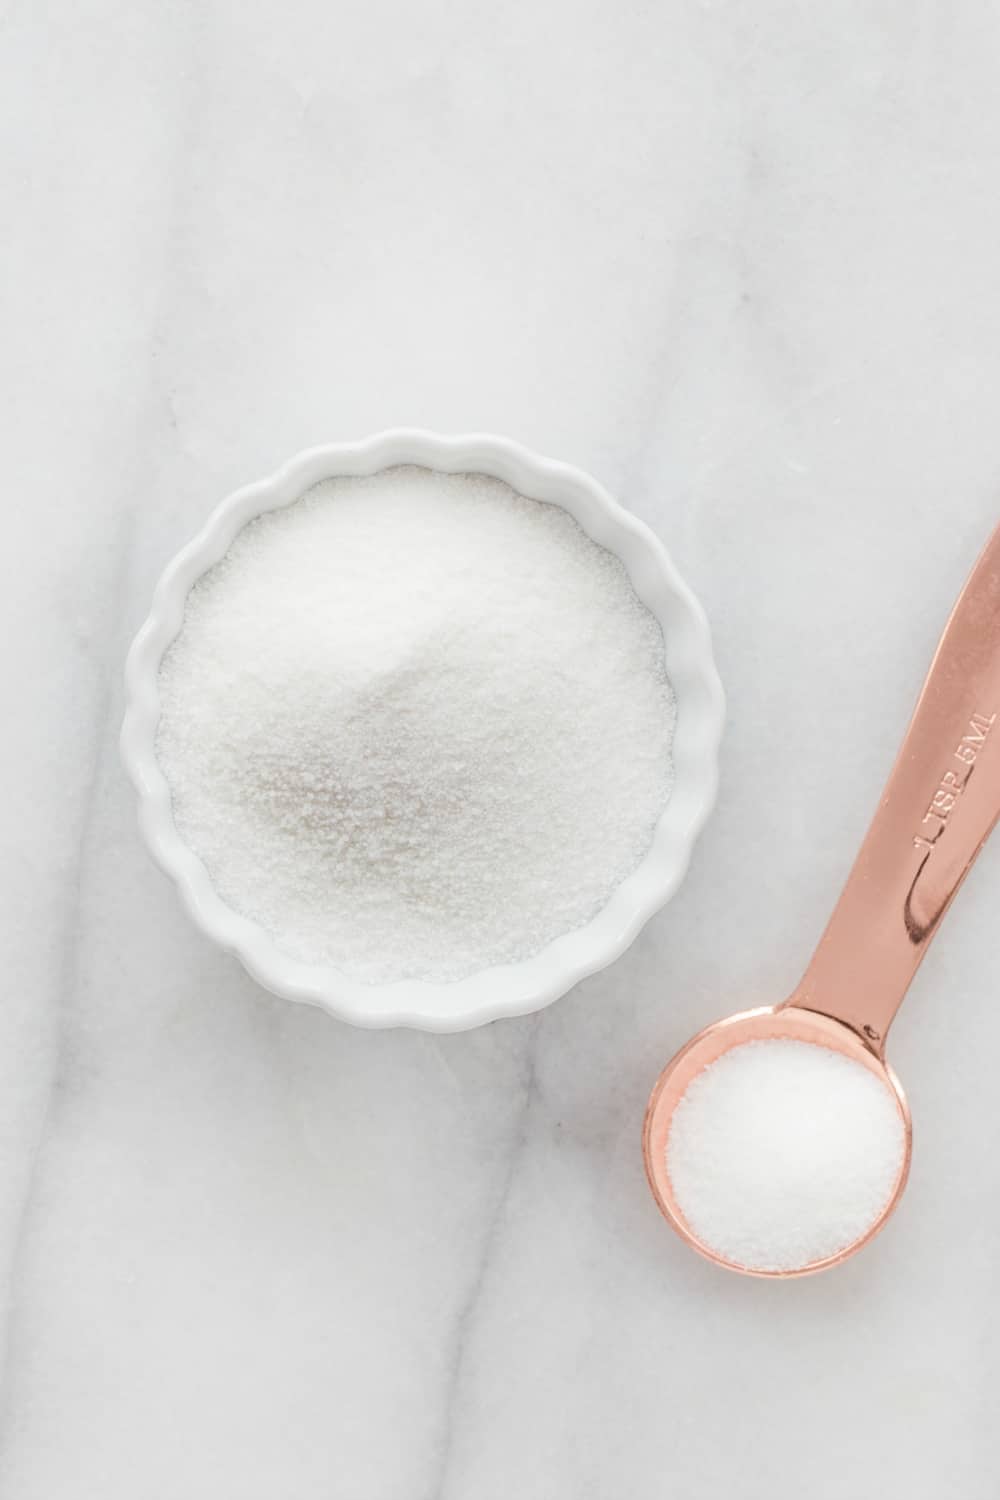 Sugar is one of the most important baking ingredients we use. Find out the difference between the types of sugar, including sanding sugar.